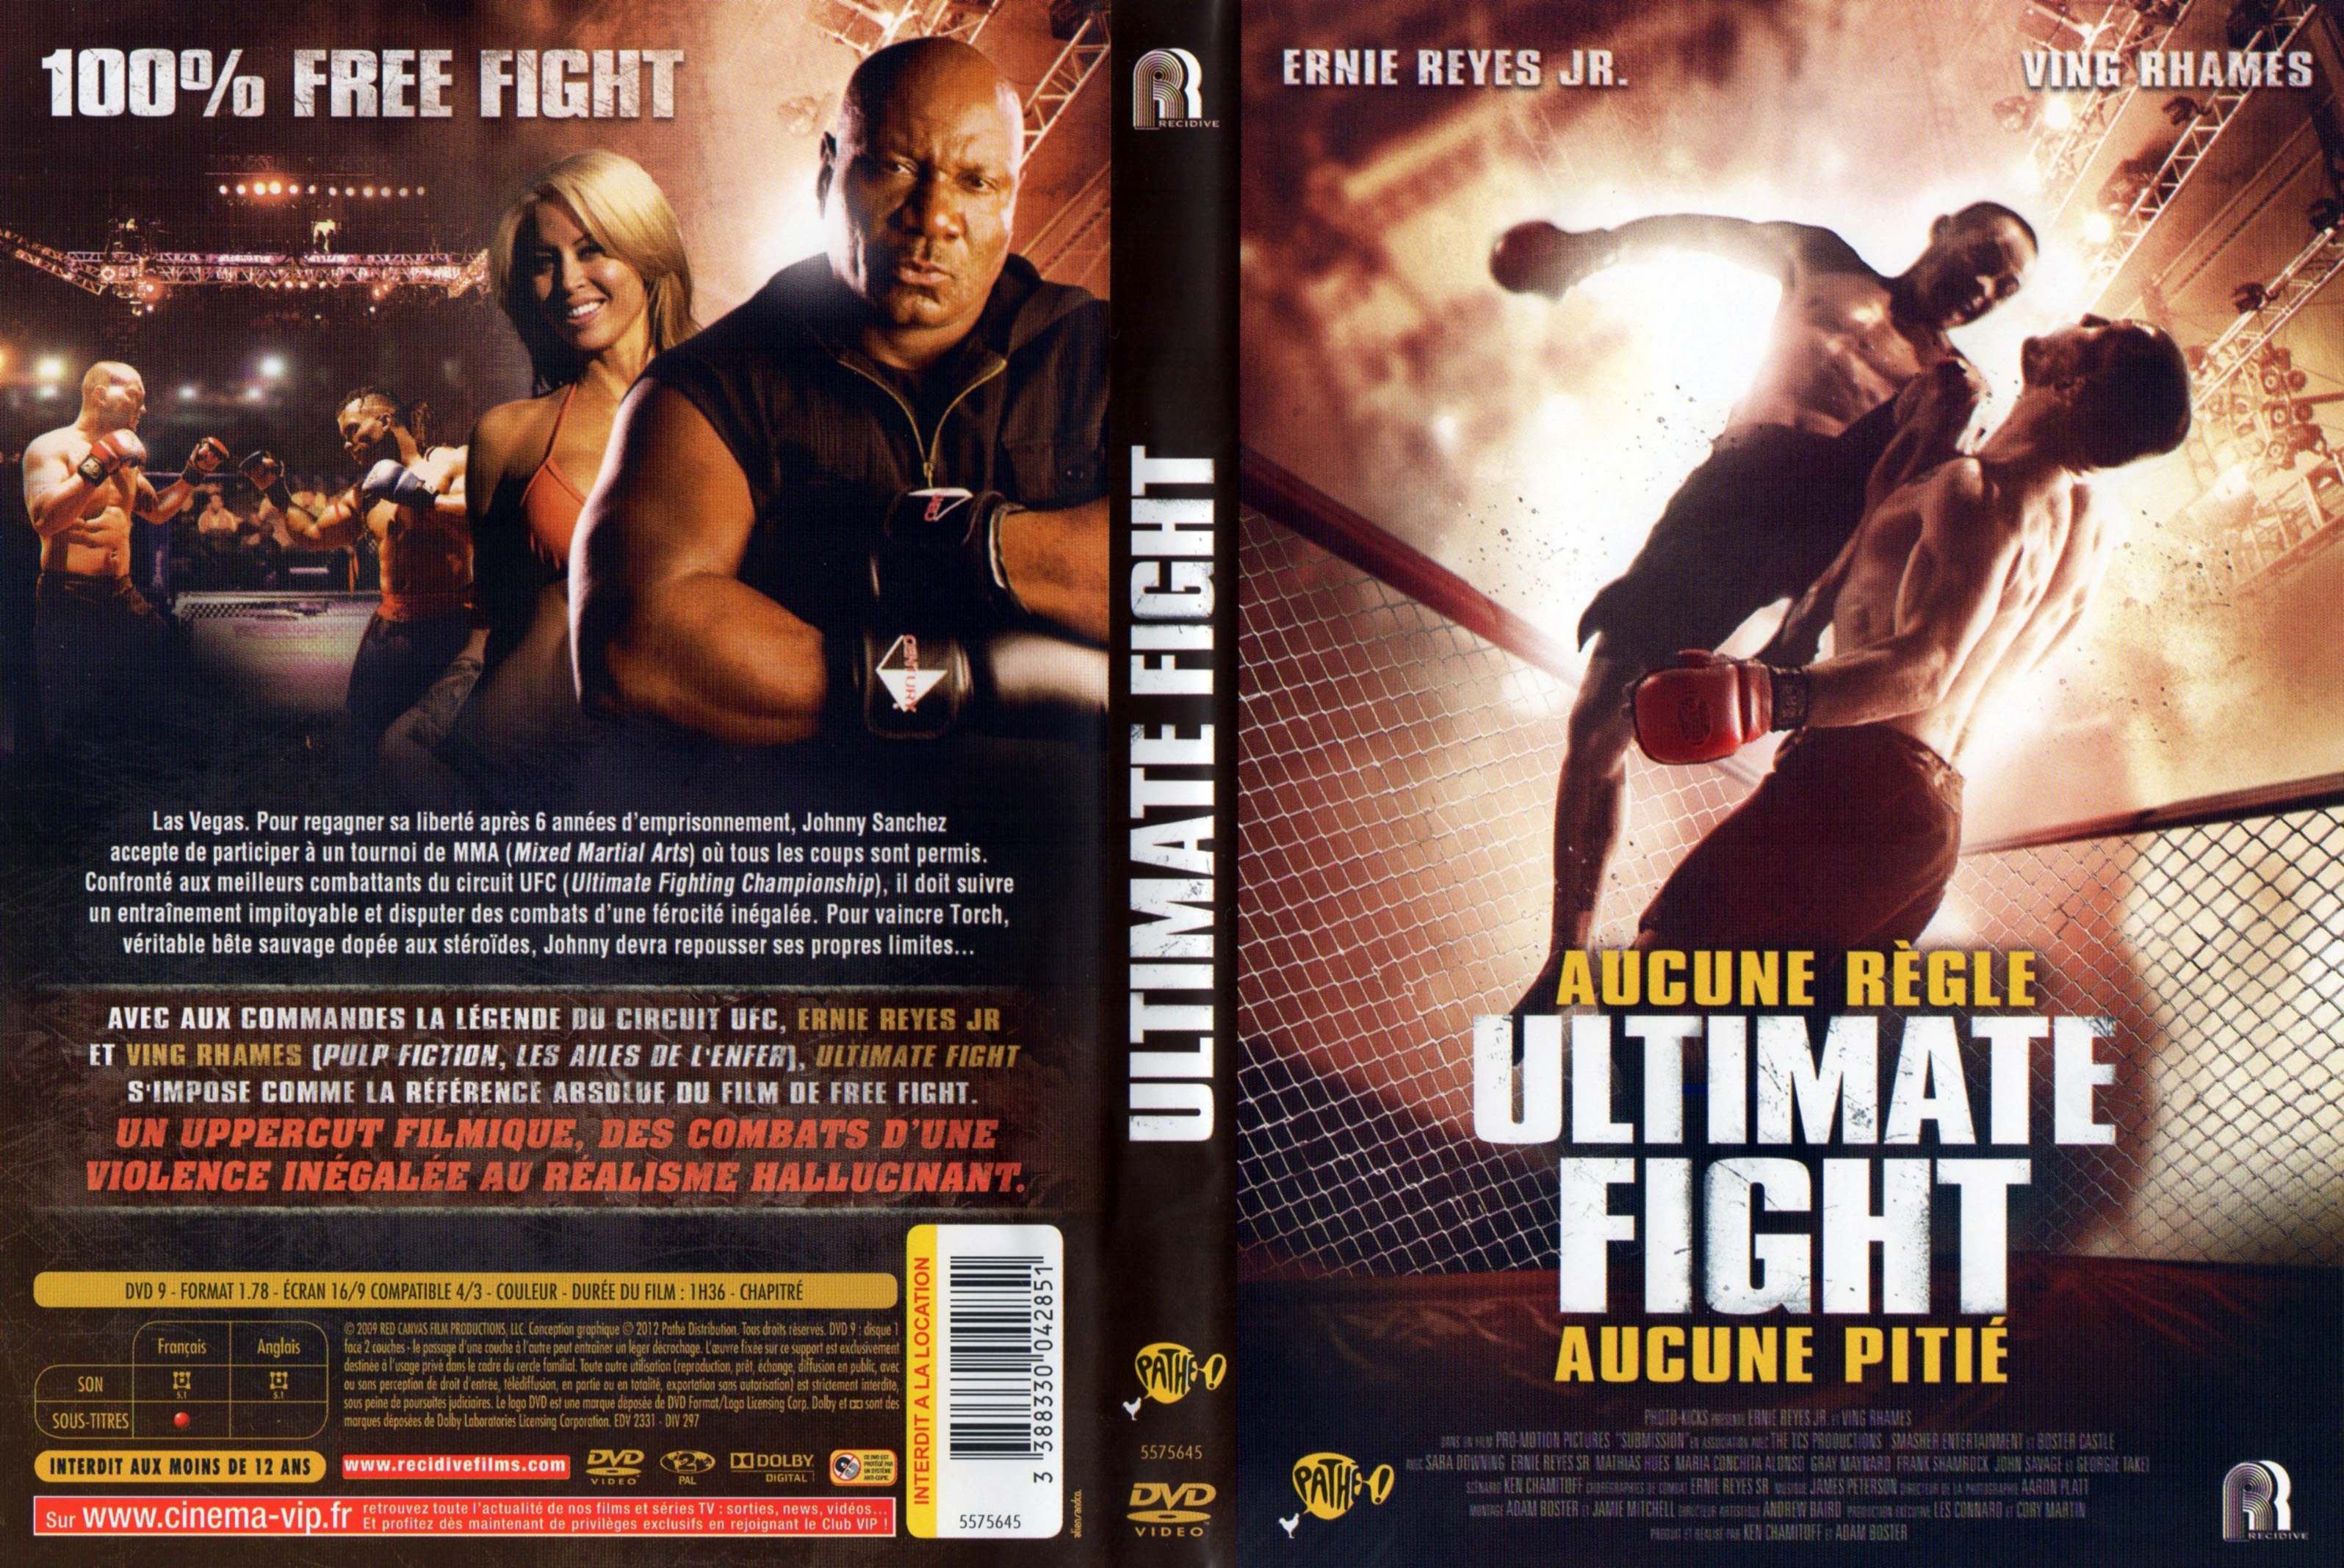 Jaquette DVD Ultimate Fight